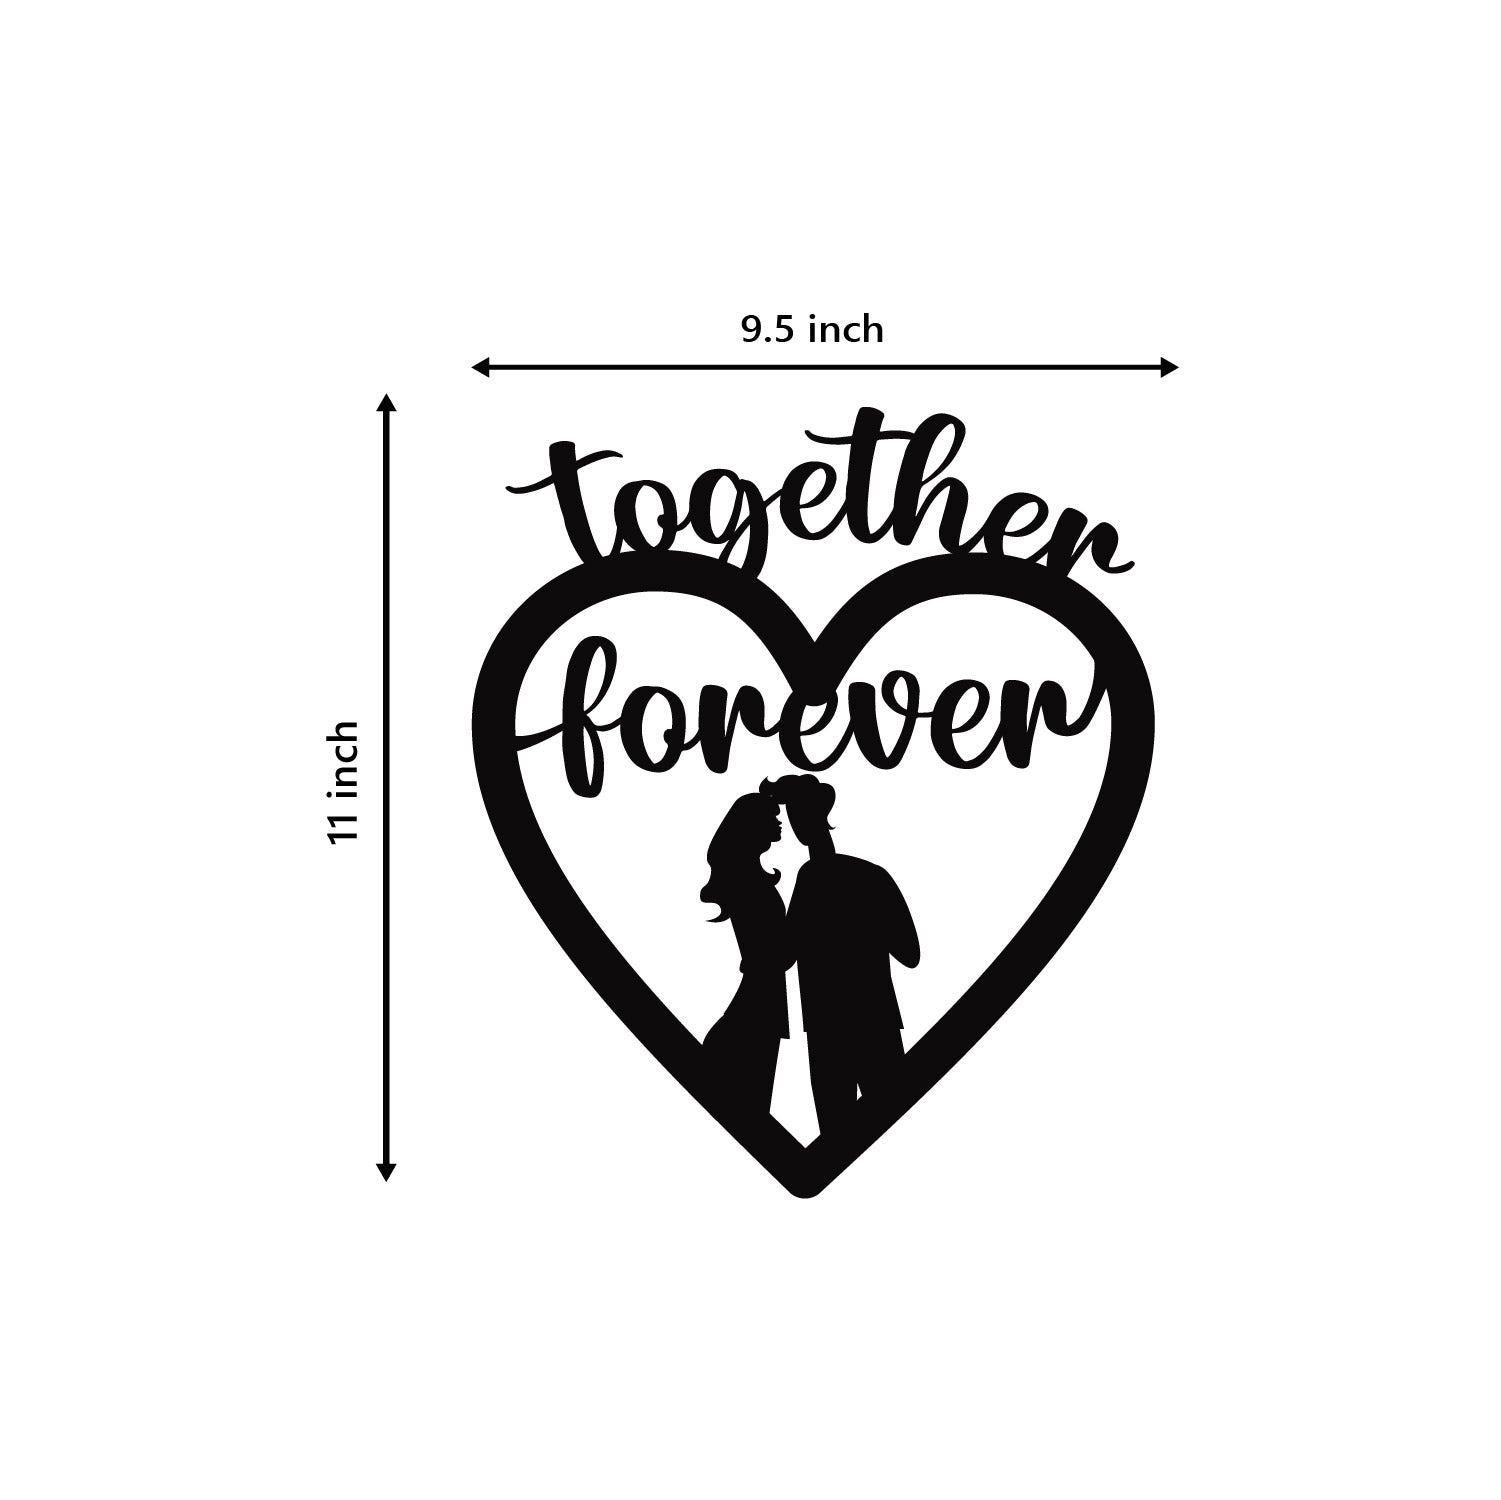 "Together Forever" Love Theme Black Engineered Wood Wall Art Cutout, Ready to Hang Home Decor 3